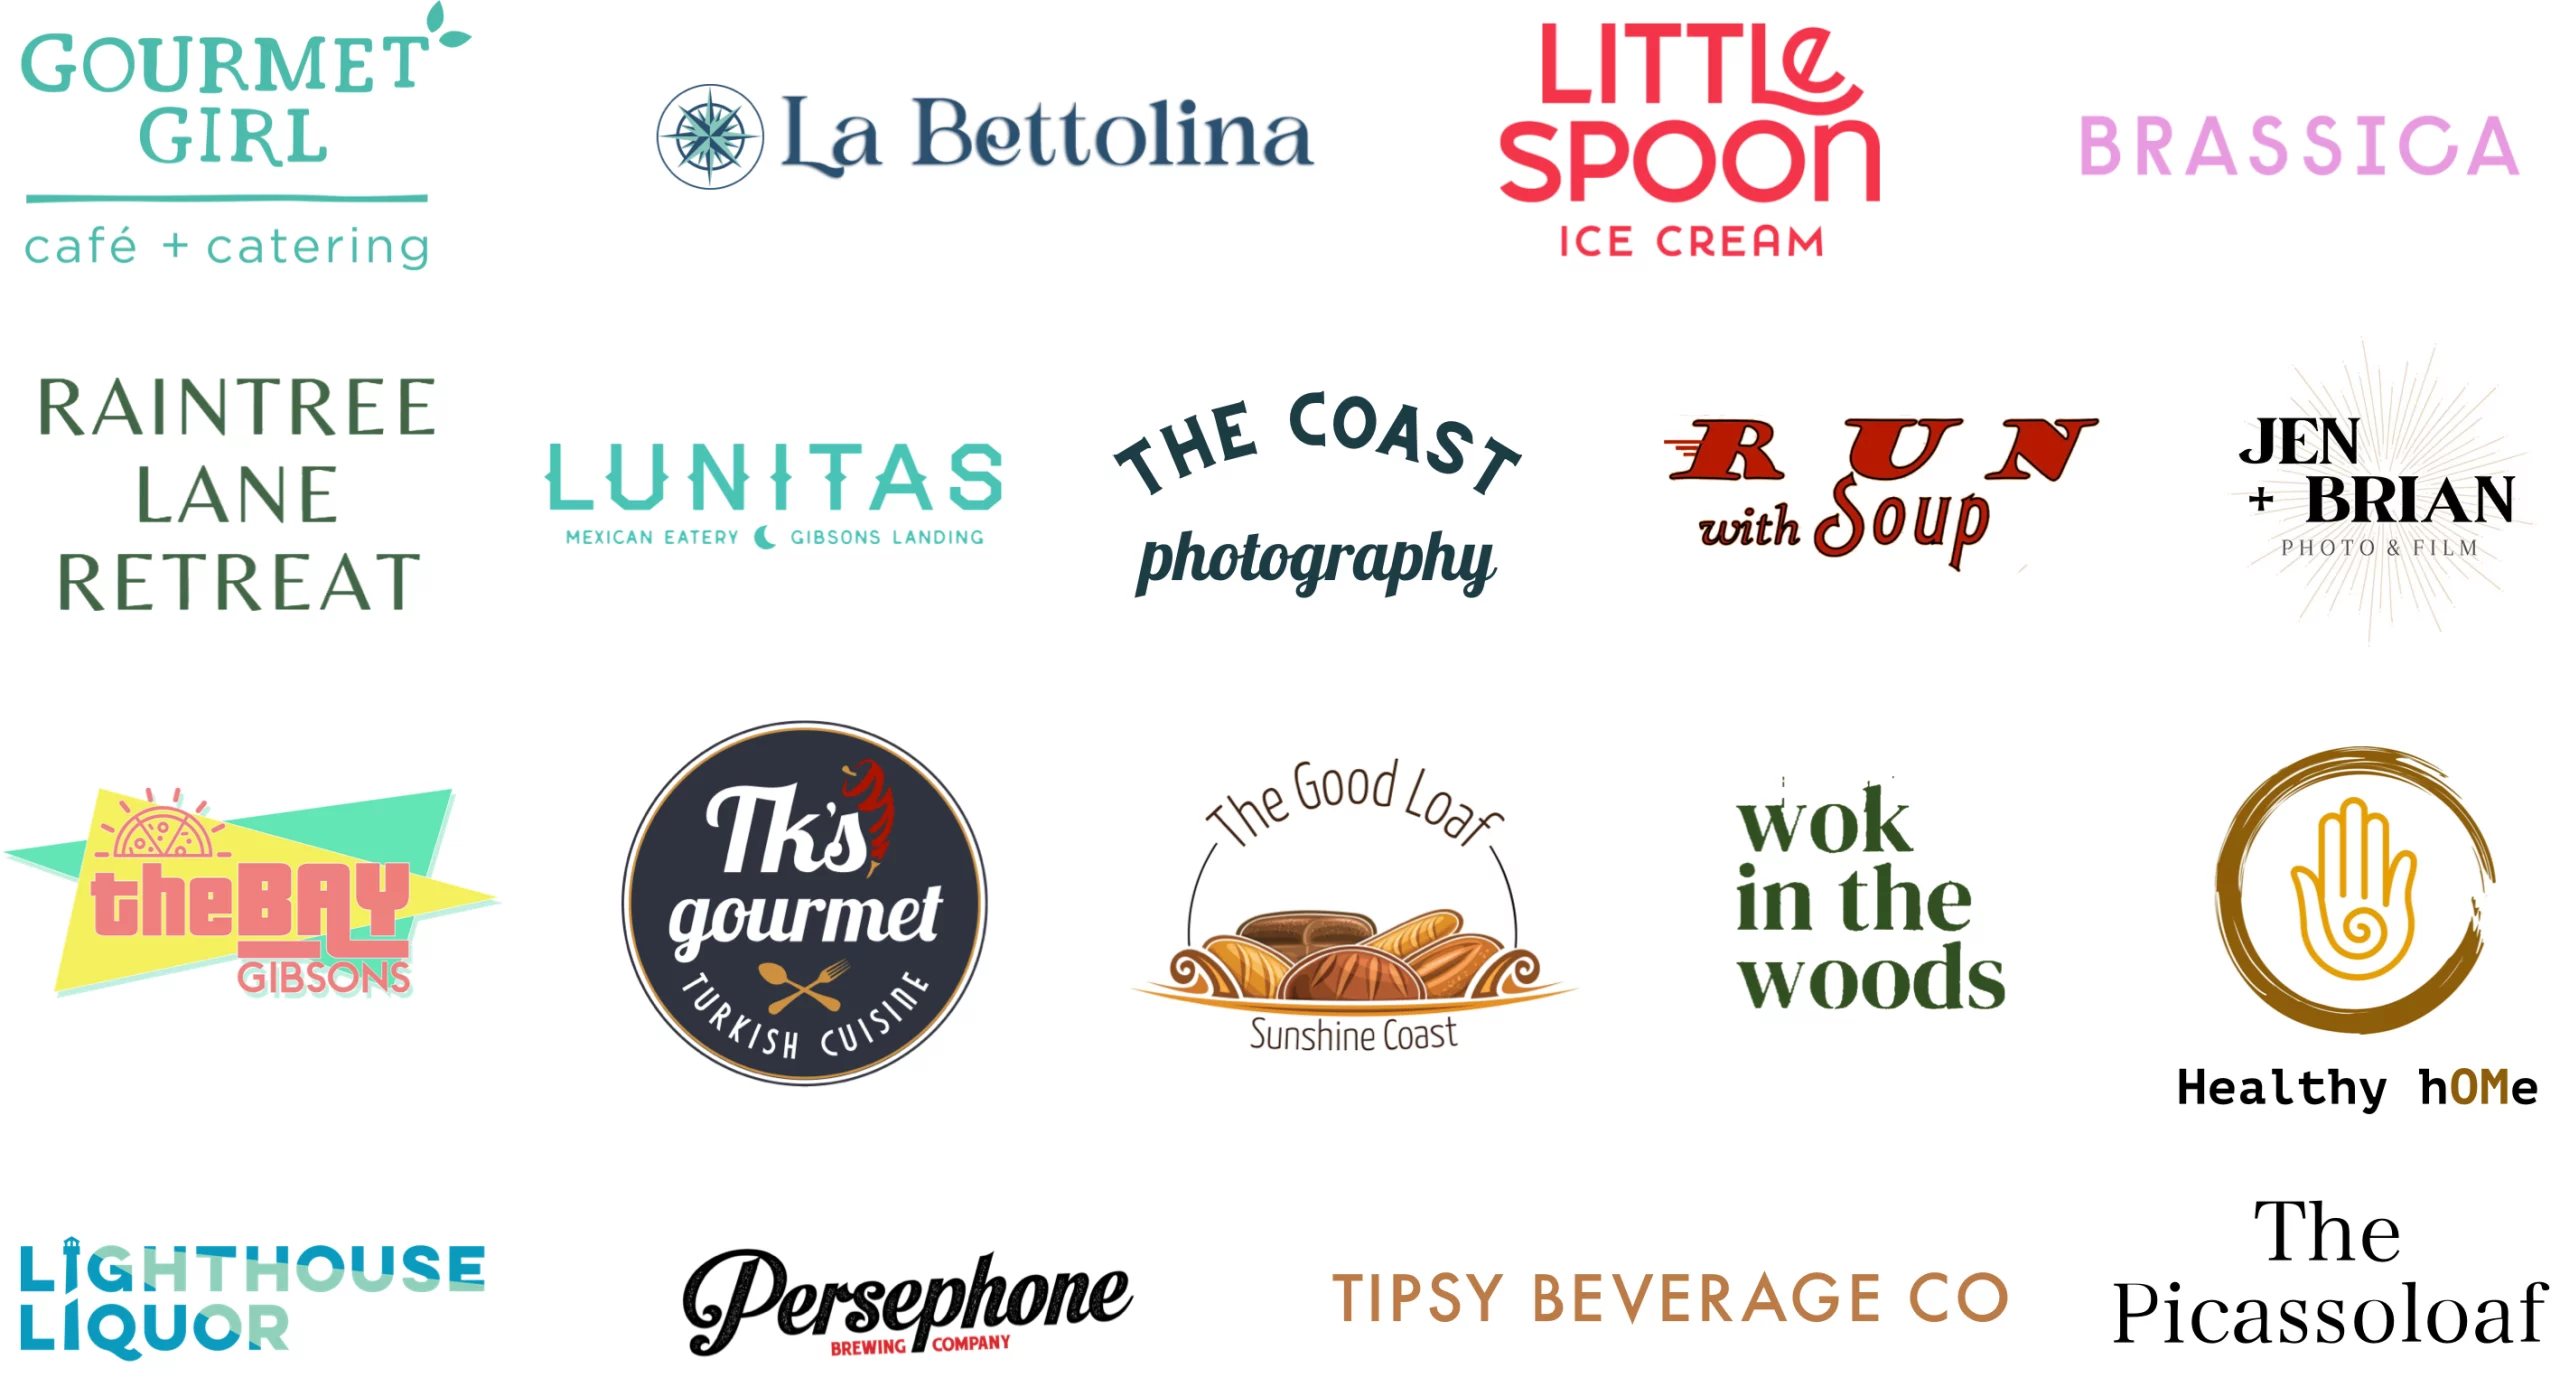 logos of Gourmet Girl, La Bettolina, Little Spoon, Brassica, Raintree Lane Retreat, Lunitas, The Picassoloaf, Run with soup, The Bay, TK's gourmet, The goodloaf, Work in the woods, Healthy hOMe, Lighthouse liquor, Persephone Brewing and Tipsy Beverage Co, Coast photo co, Jen+ Brian Photography